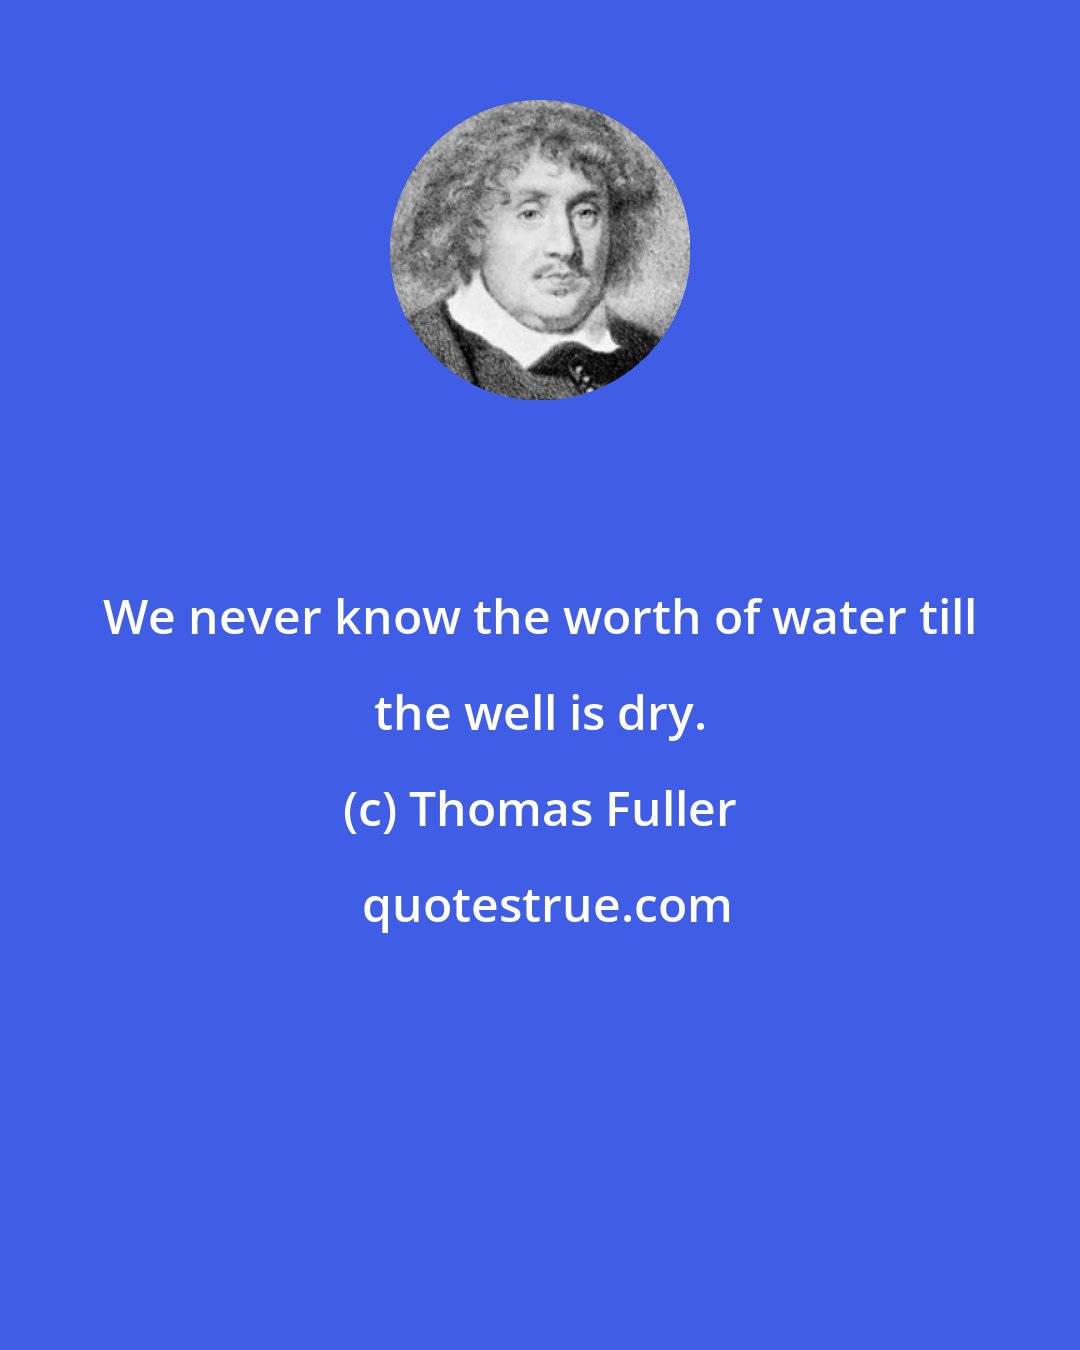 Thomas Fuller: We never know the worth of water till the well is dry.